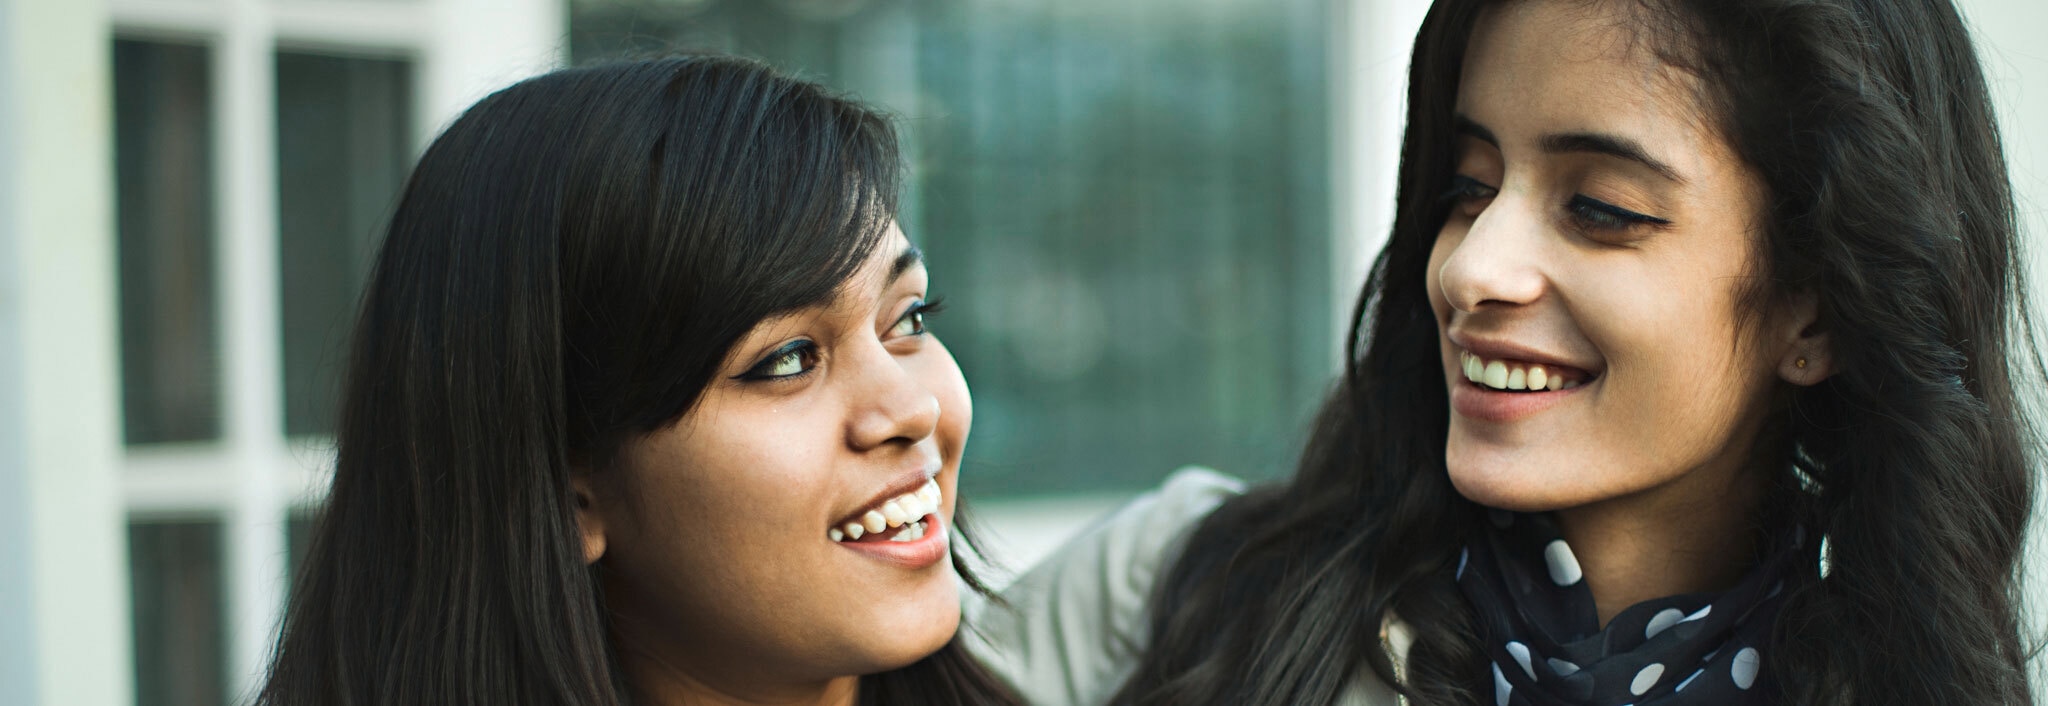 Close up of two women with thick black hair looking at each other mid-conversation